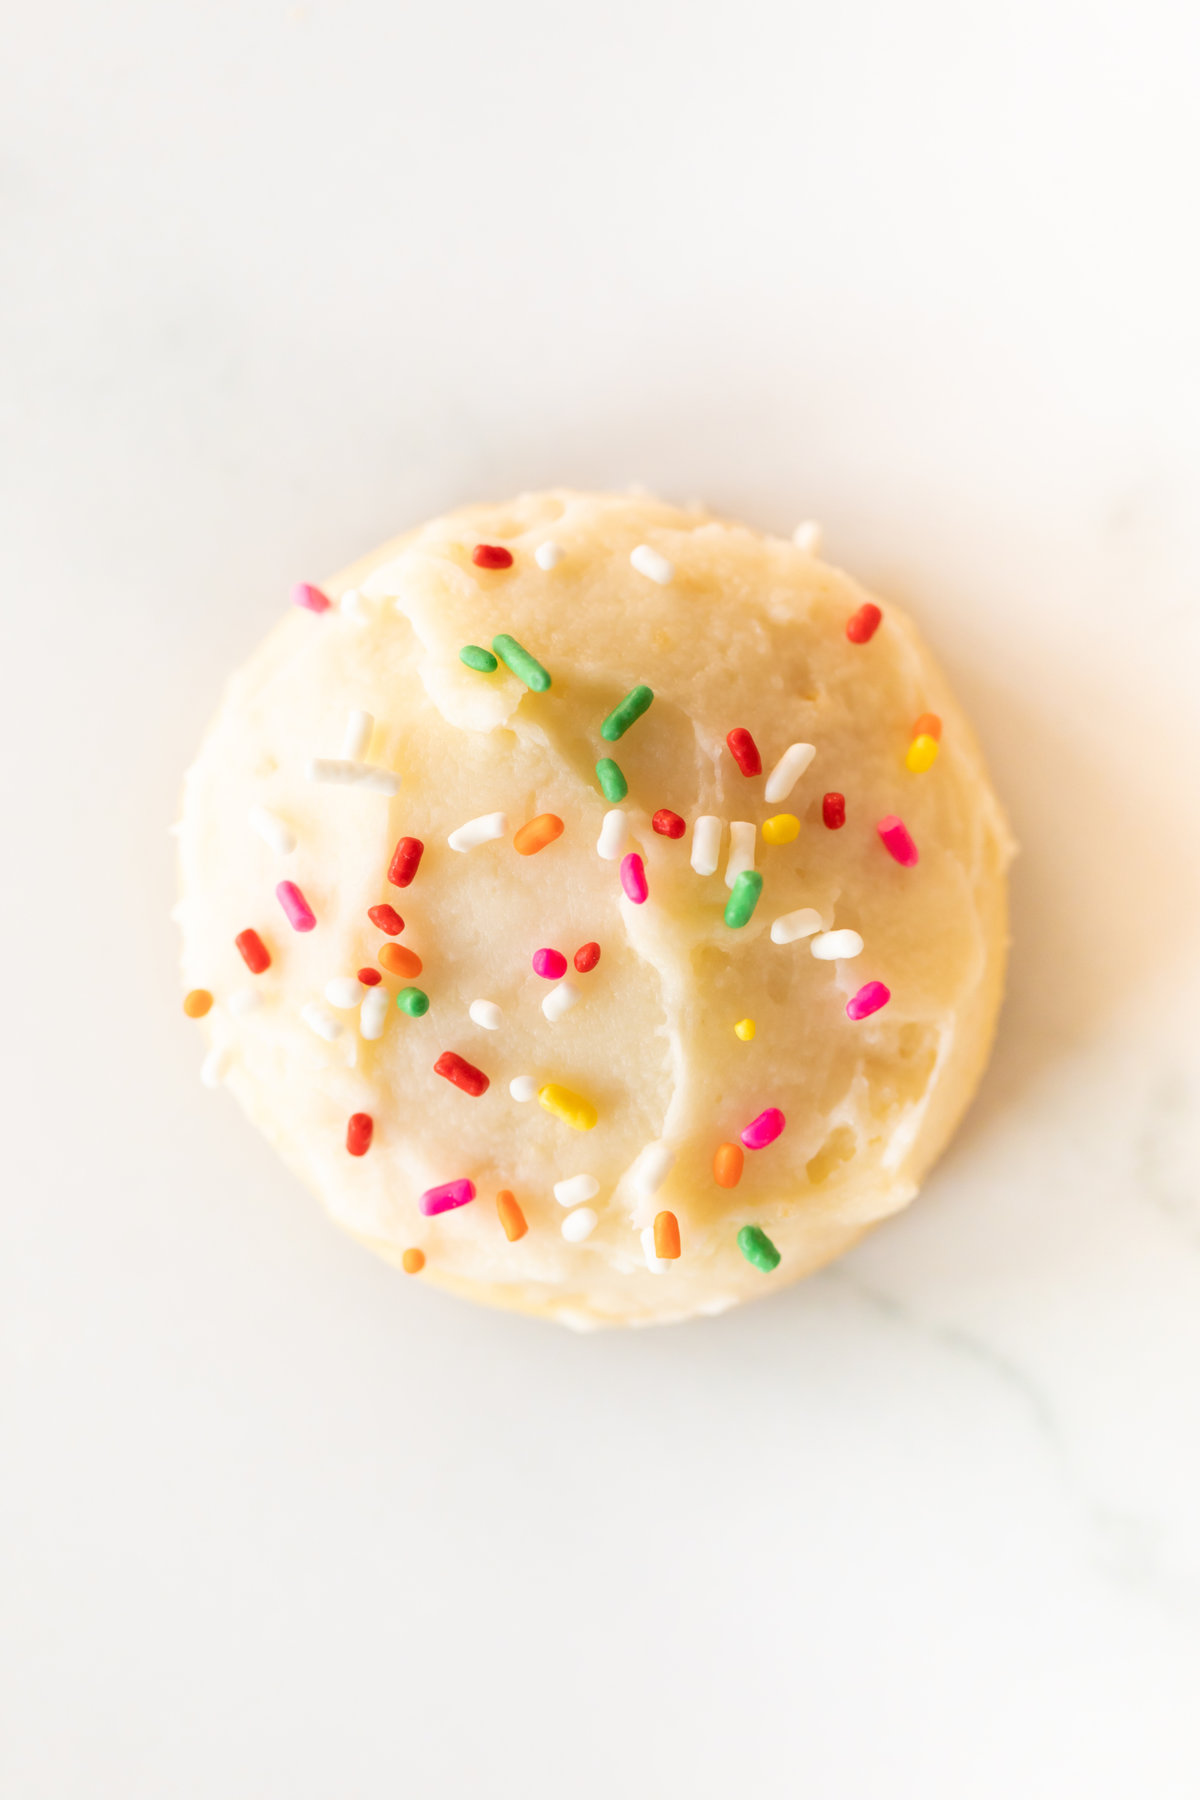 A melt in your mouth sugar cookie frosted with sprinkles on a marble surface.